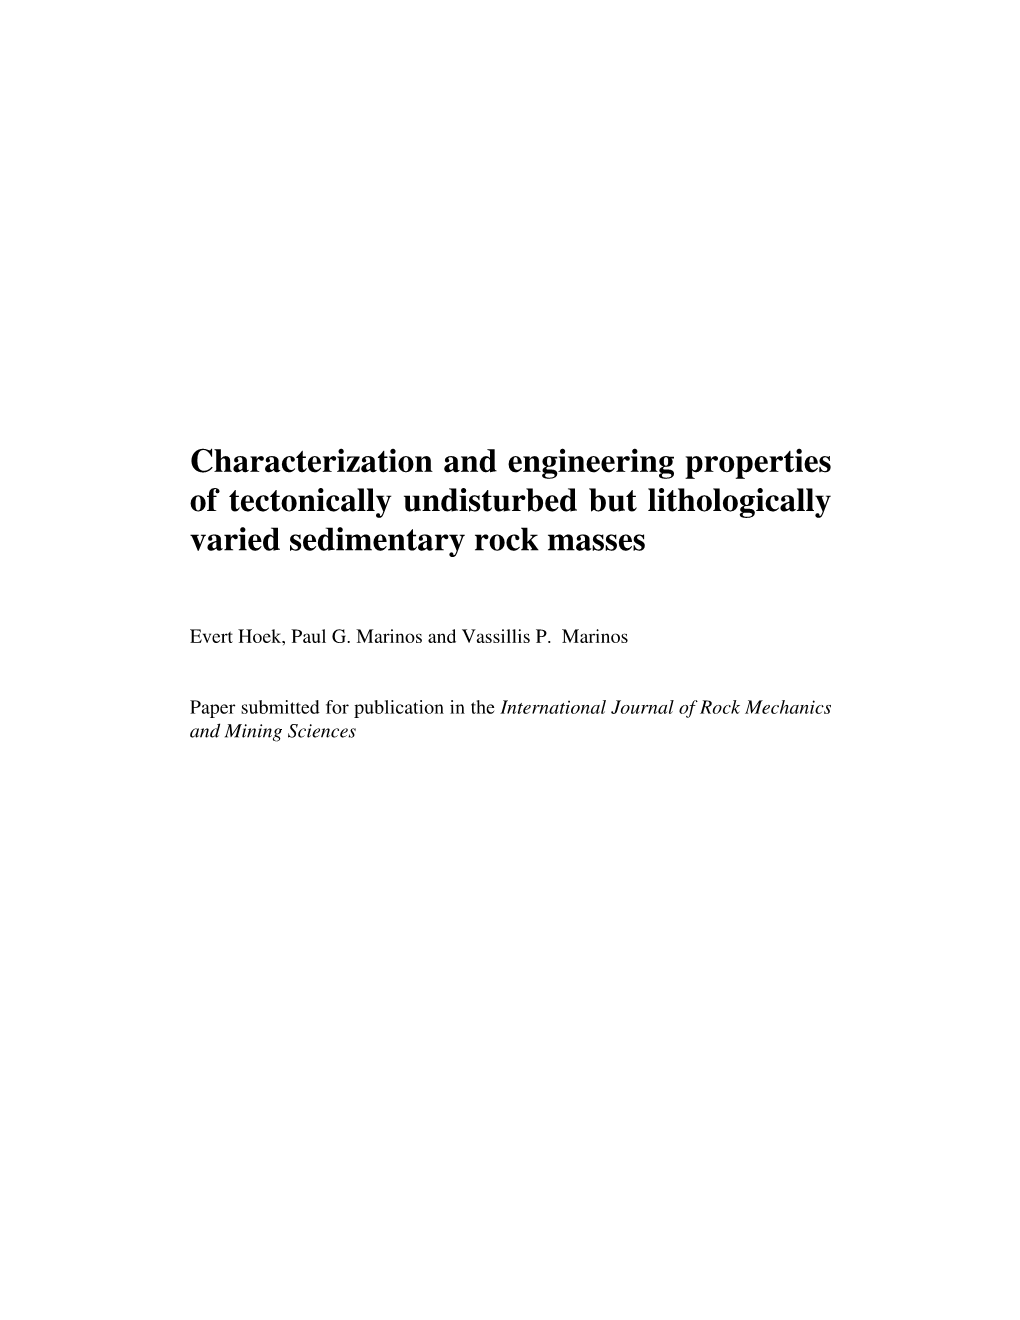 Characterization and Engineering Properties of Tectonically Undisturbed but Lithologically Varied Sedimentary Rock Masses